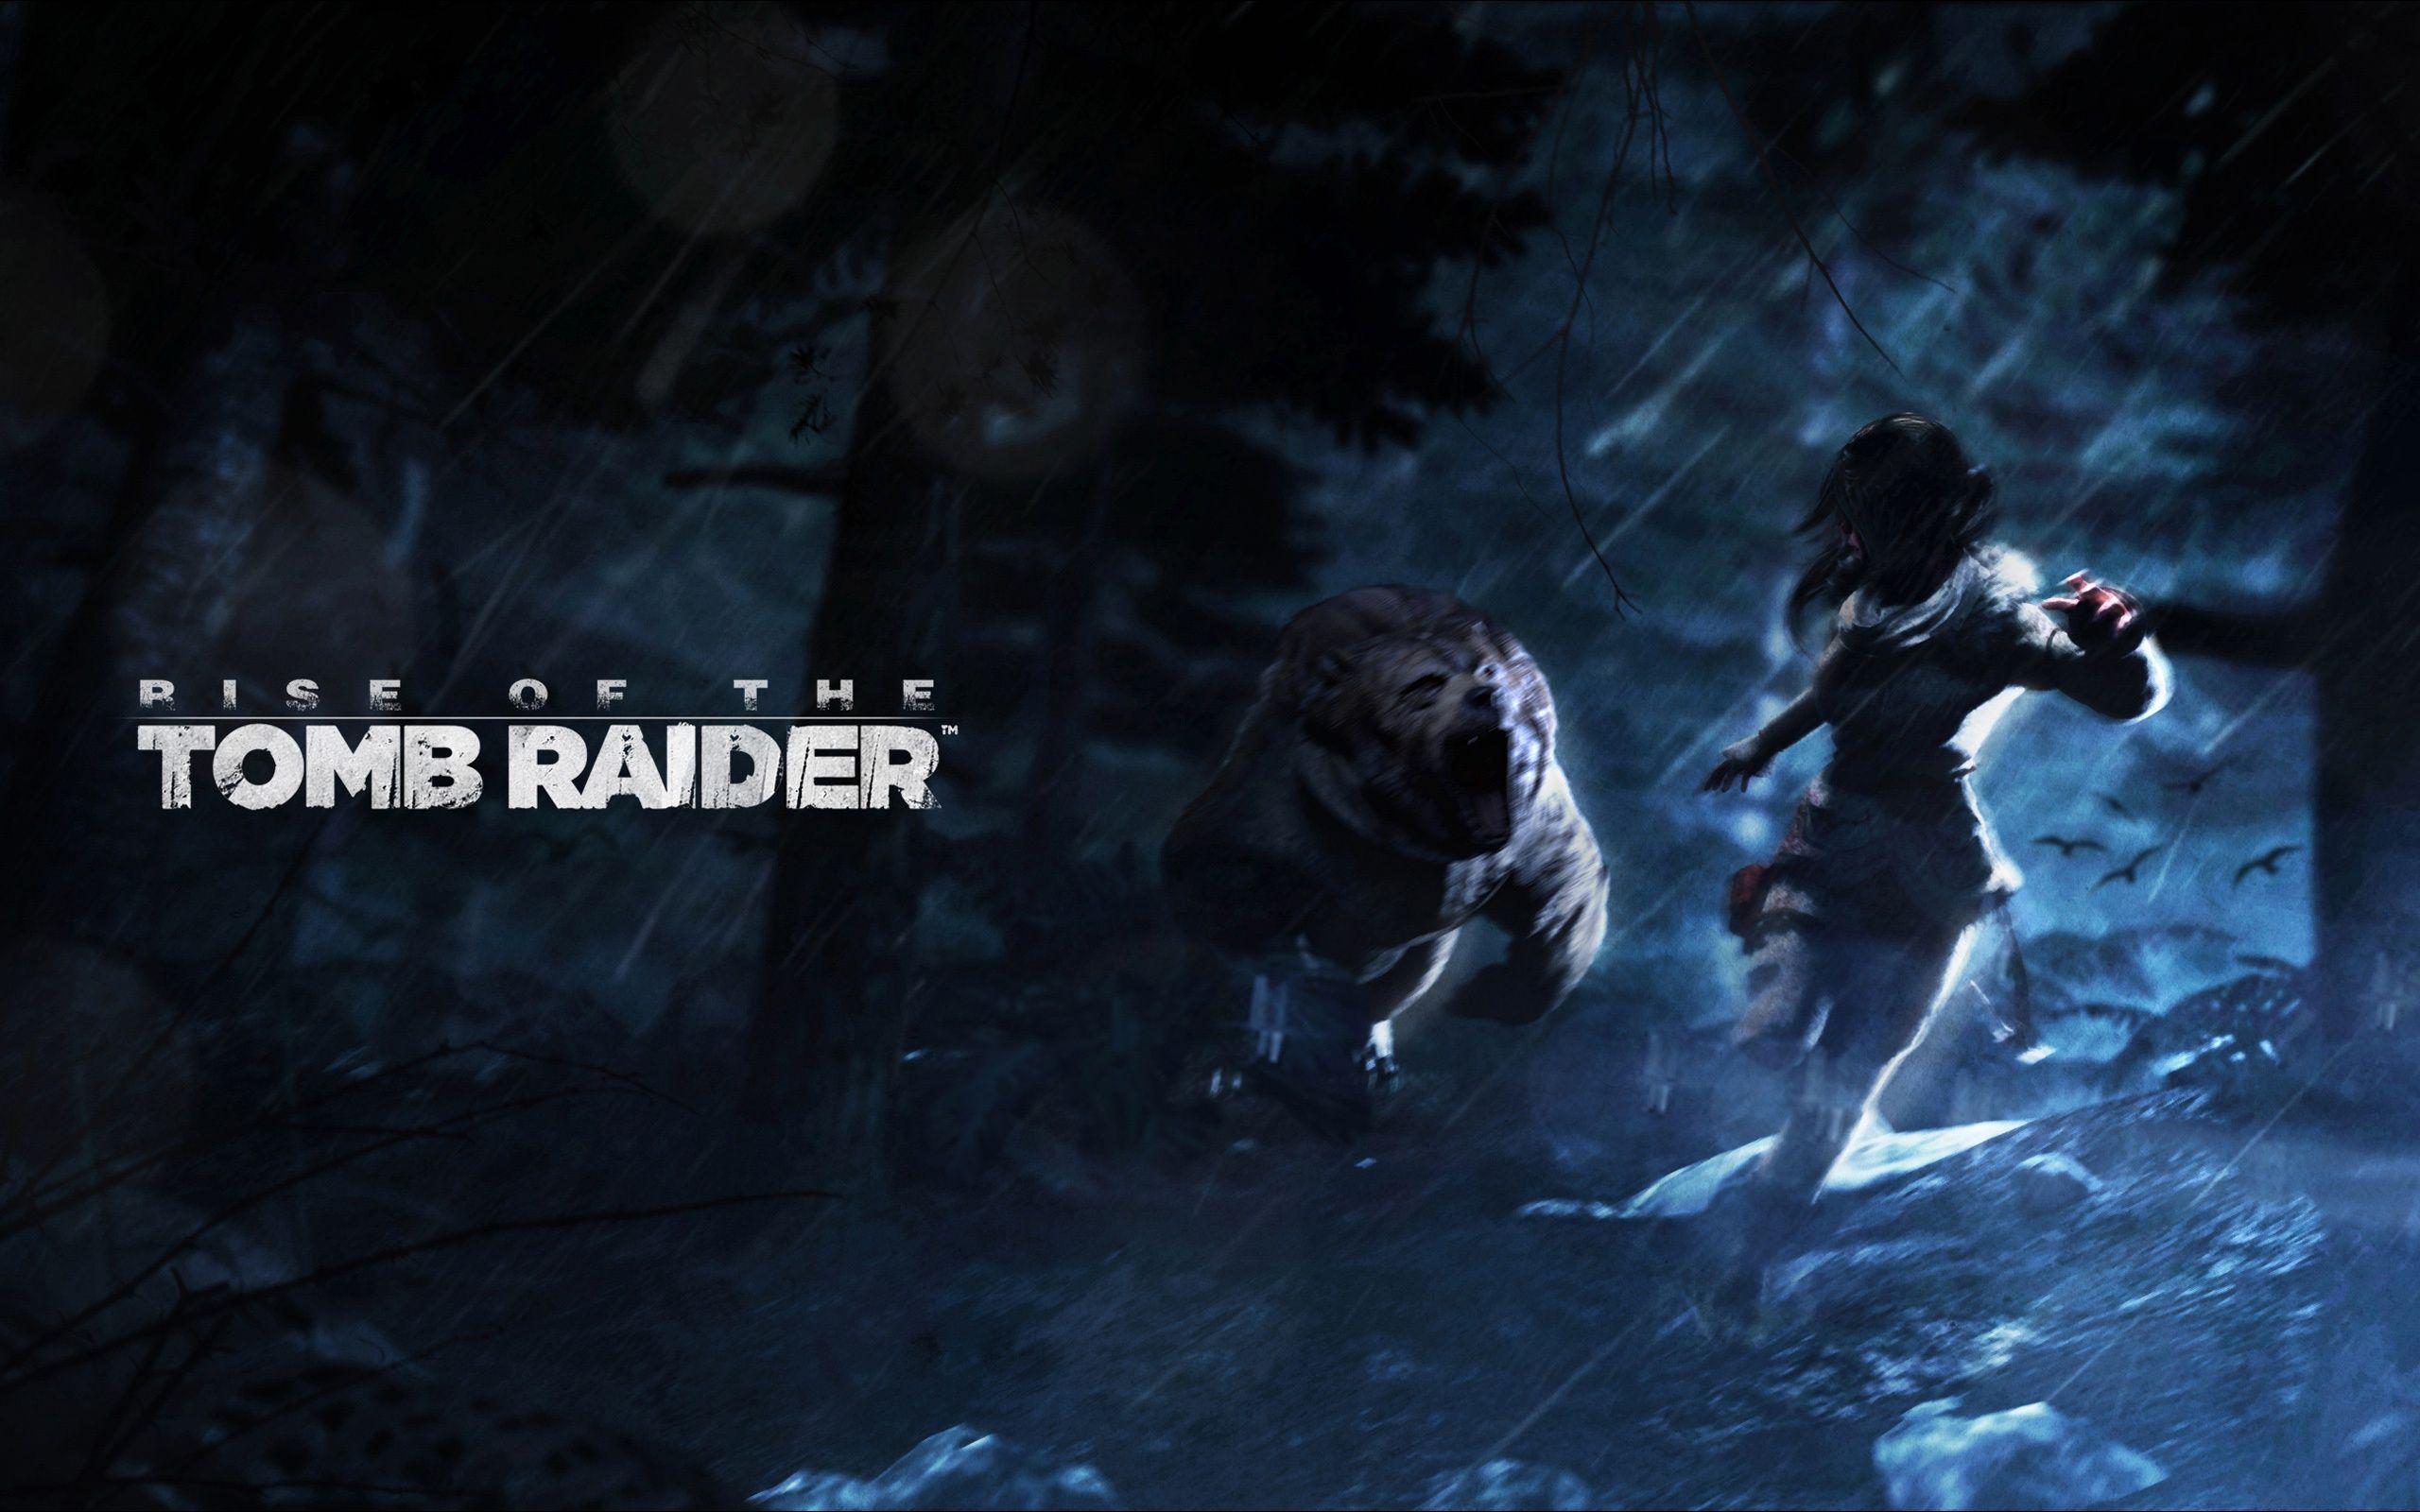 Rise of the Tomb Raider Artwork Wallpaper in jpg format for free